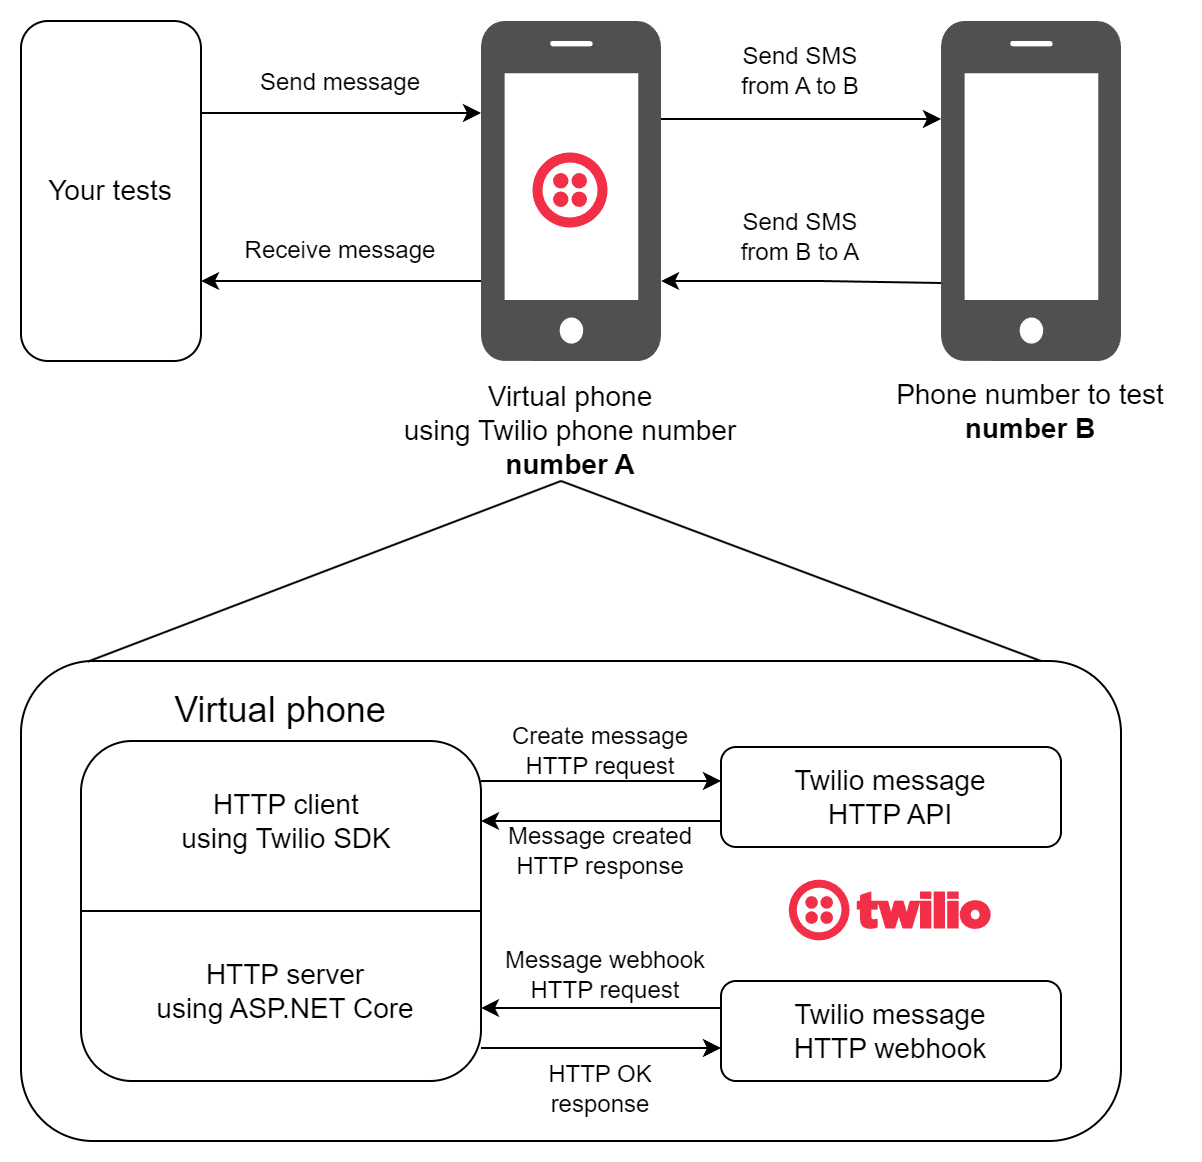 Diagram showing that your tests will send and receive messages between a Twilio phone number and the phone number to test. The diagram is described in more detail below.